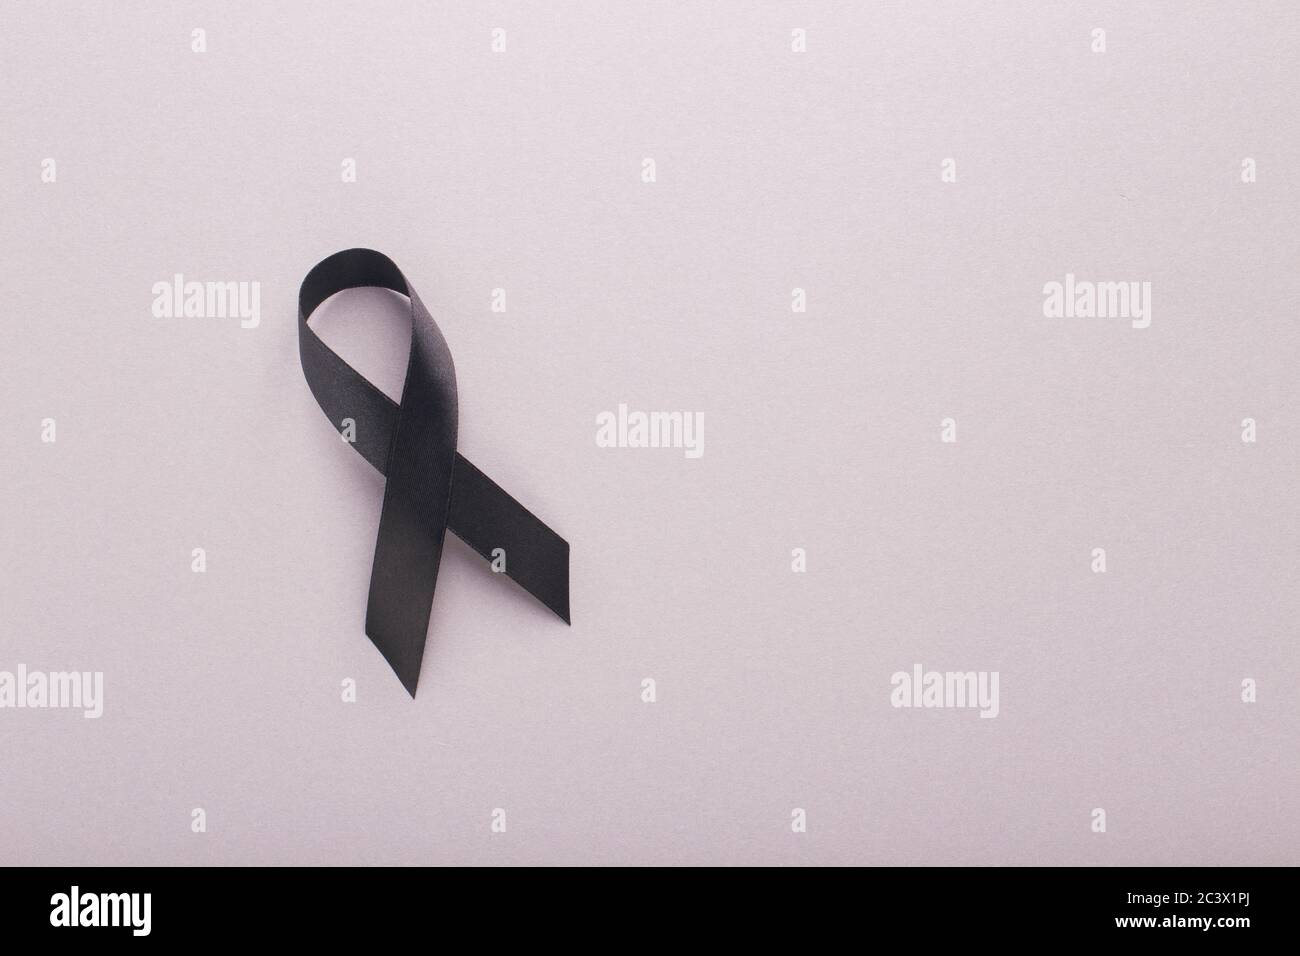 Realistic Black Awareness Ribbon Mourning Symbol of Support Stock Photo